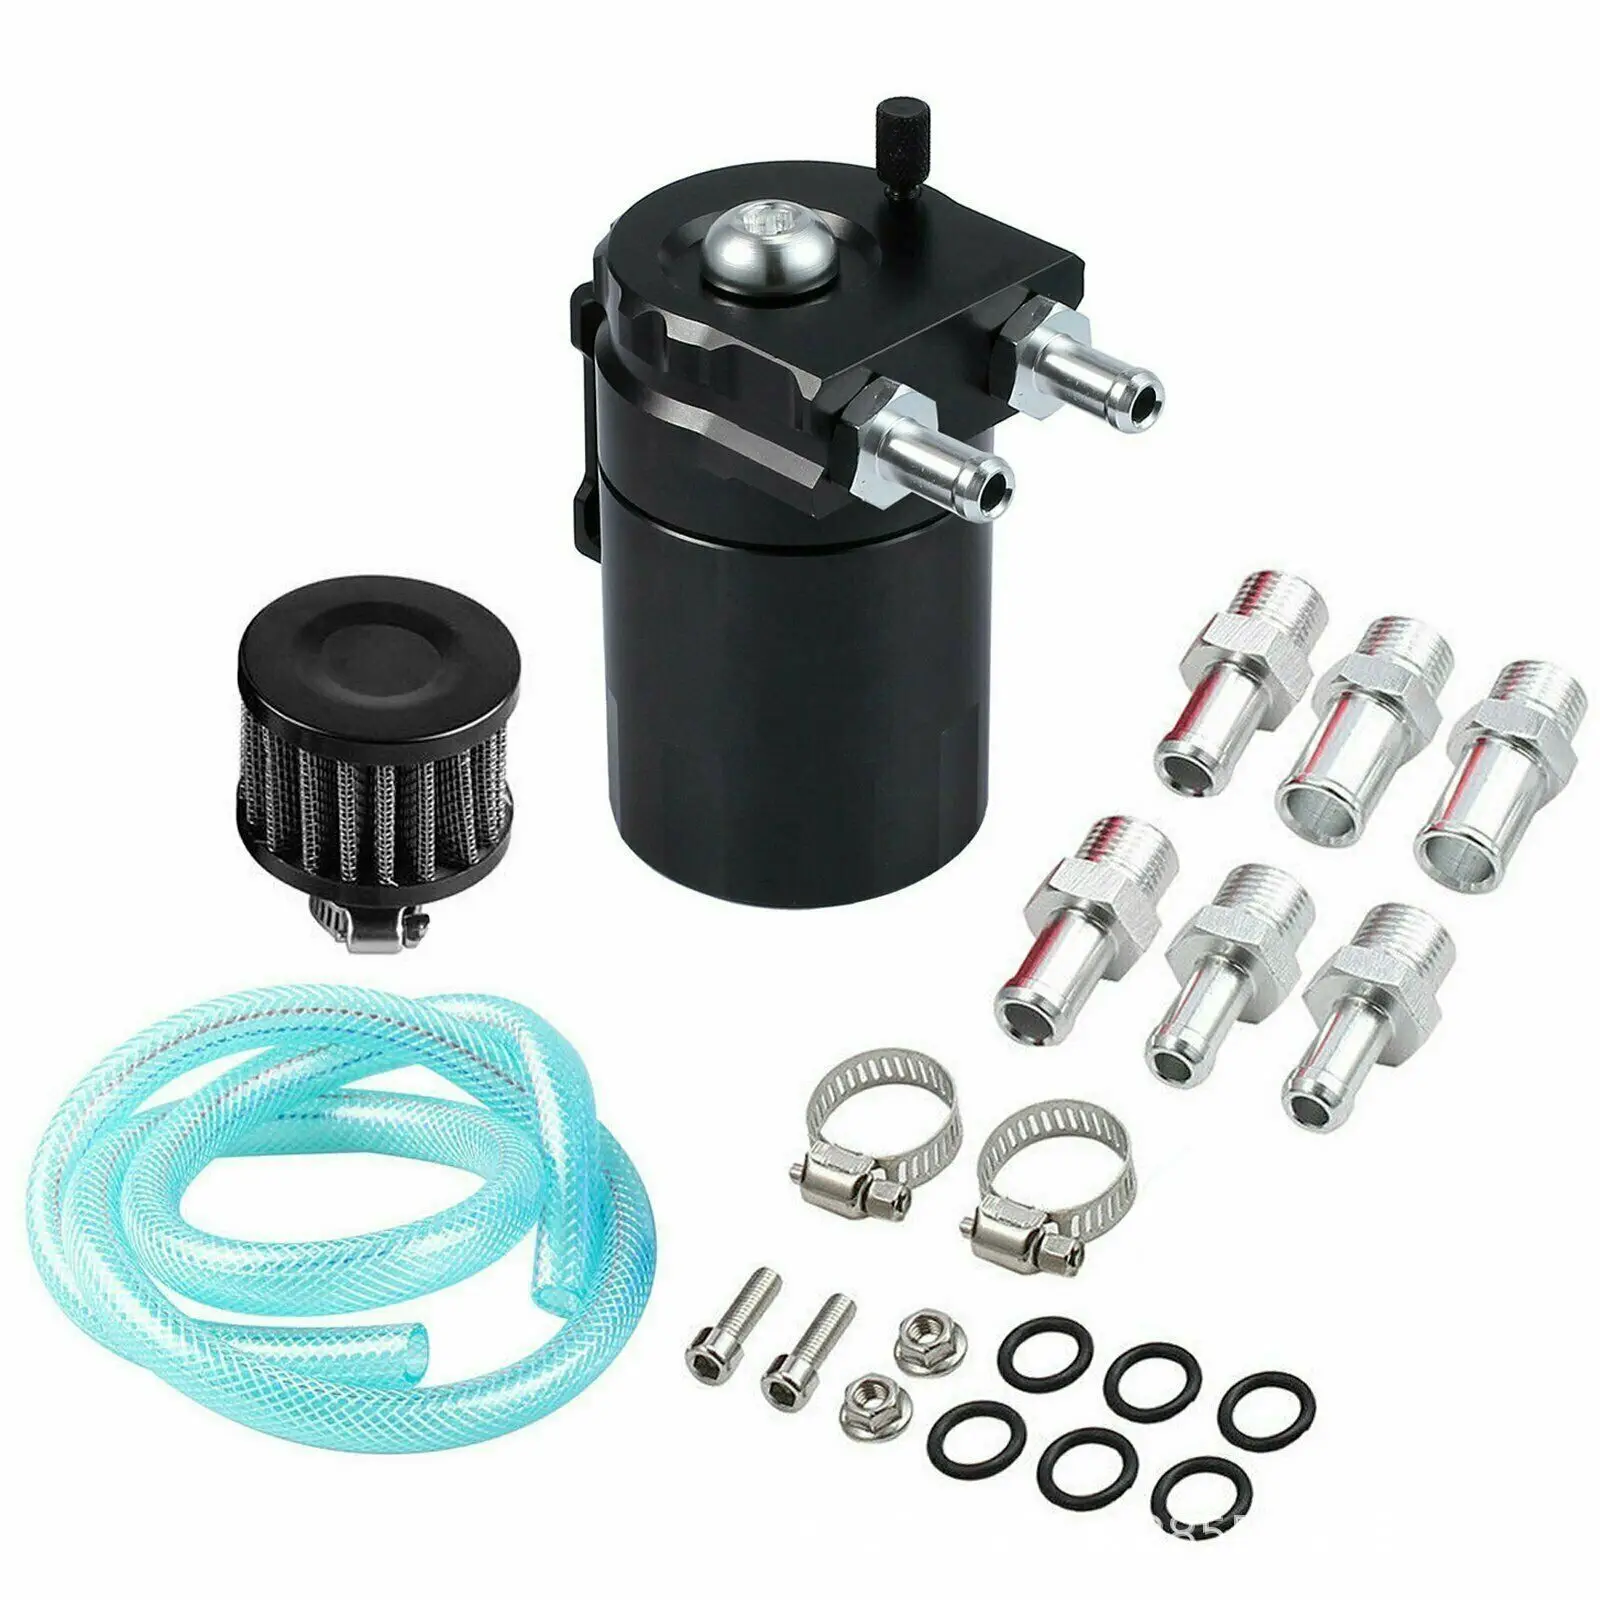 

Universal Car Oil Catch Can Kit Reservoir Tank 300ml with Breather Aluminum Compact Dual Cylinder Polish Baffled